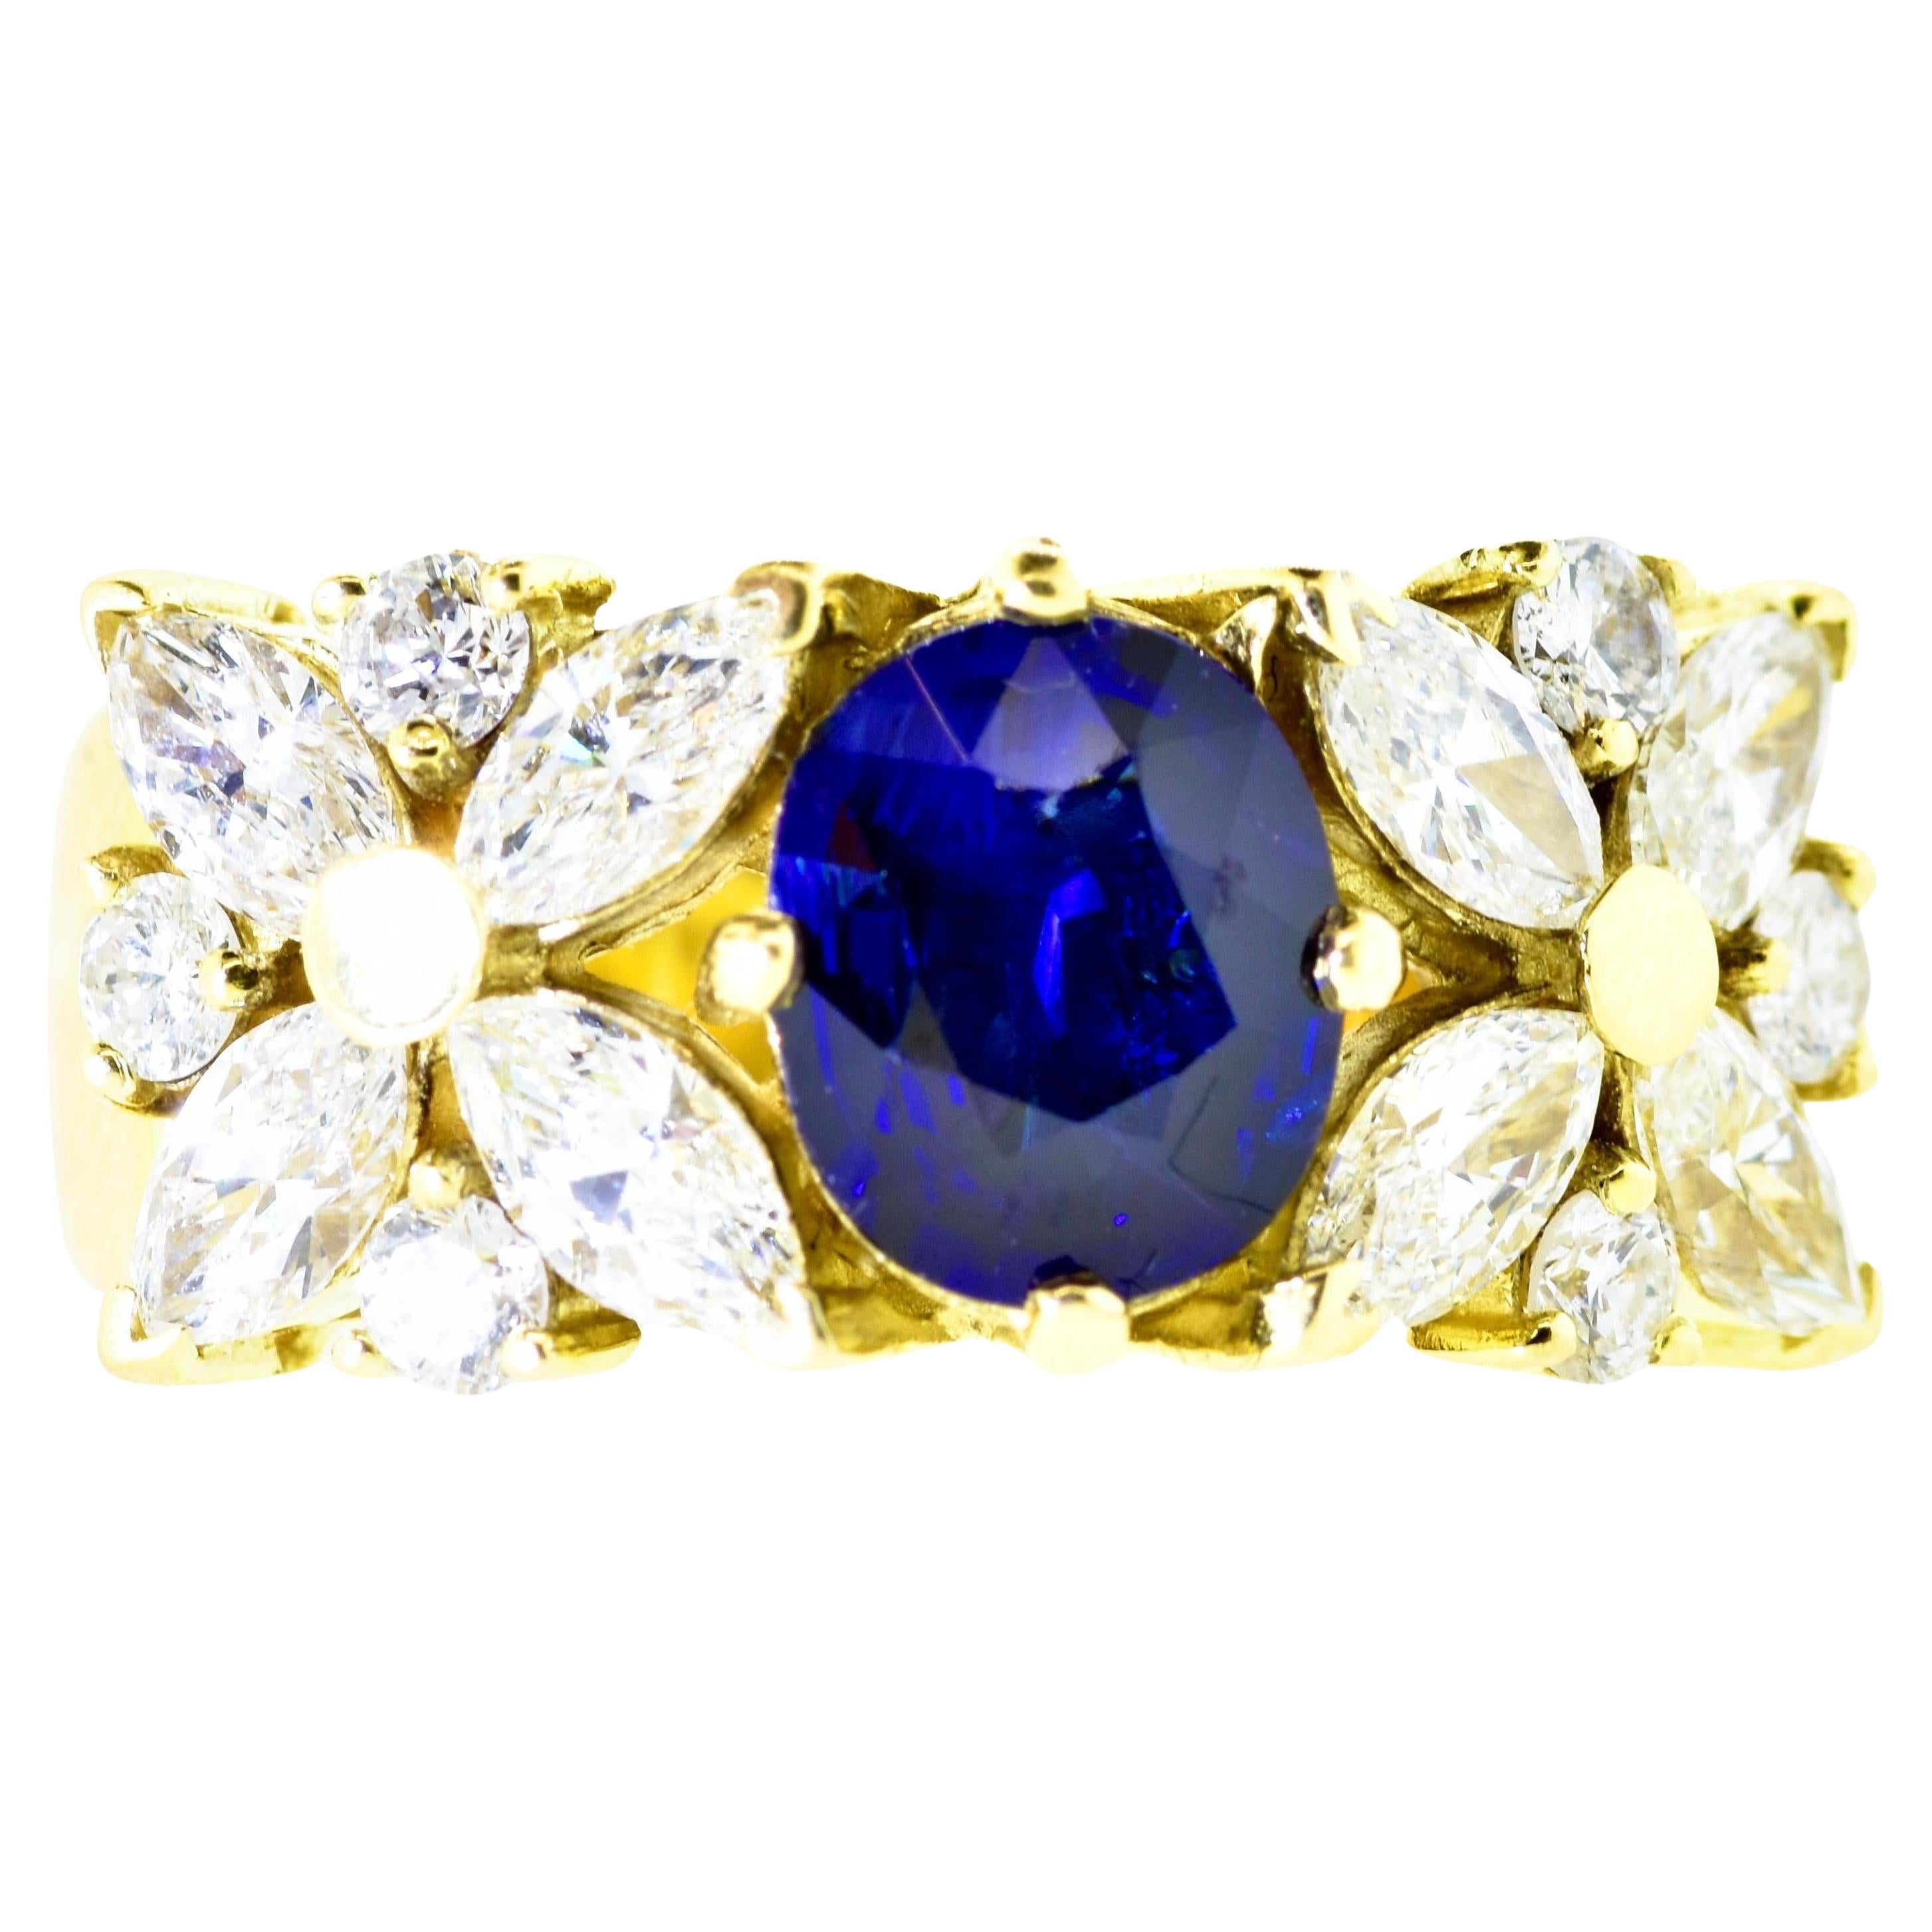 Diamond and natural bright Blue Sapphire prong set in a contemporary 18K yellow gold ring. The fine white diamonds are both round brilliant cut and marquis cut. The diamonds average H (near colorless), and VS1 (very slightly included to the first